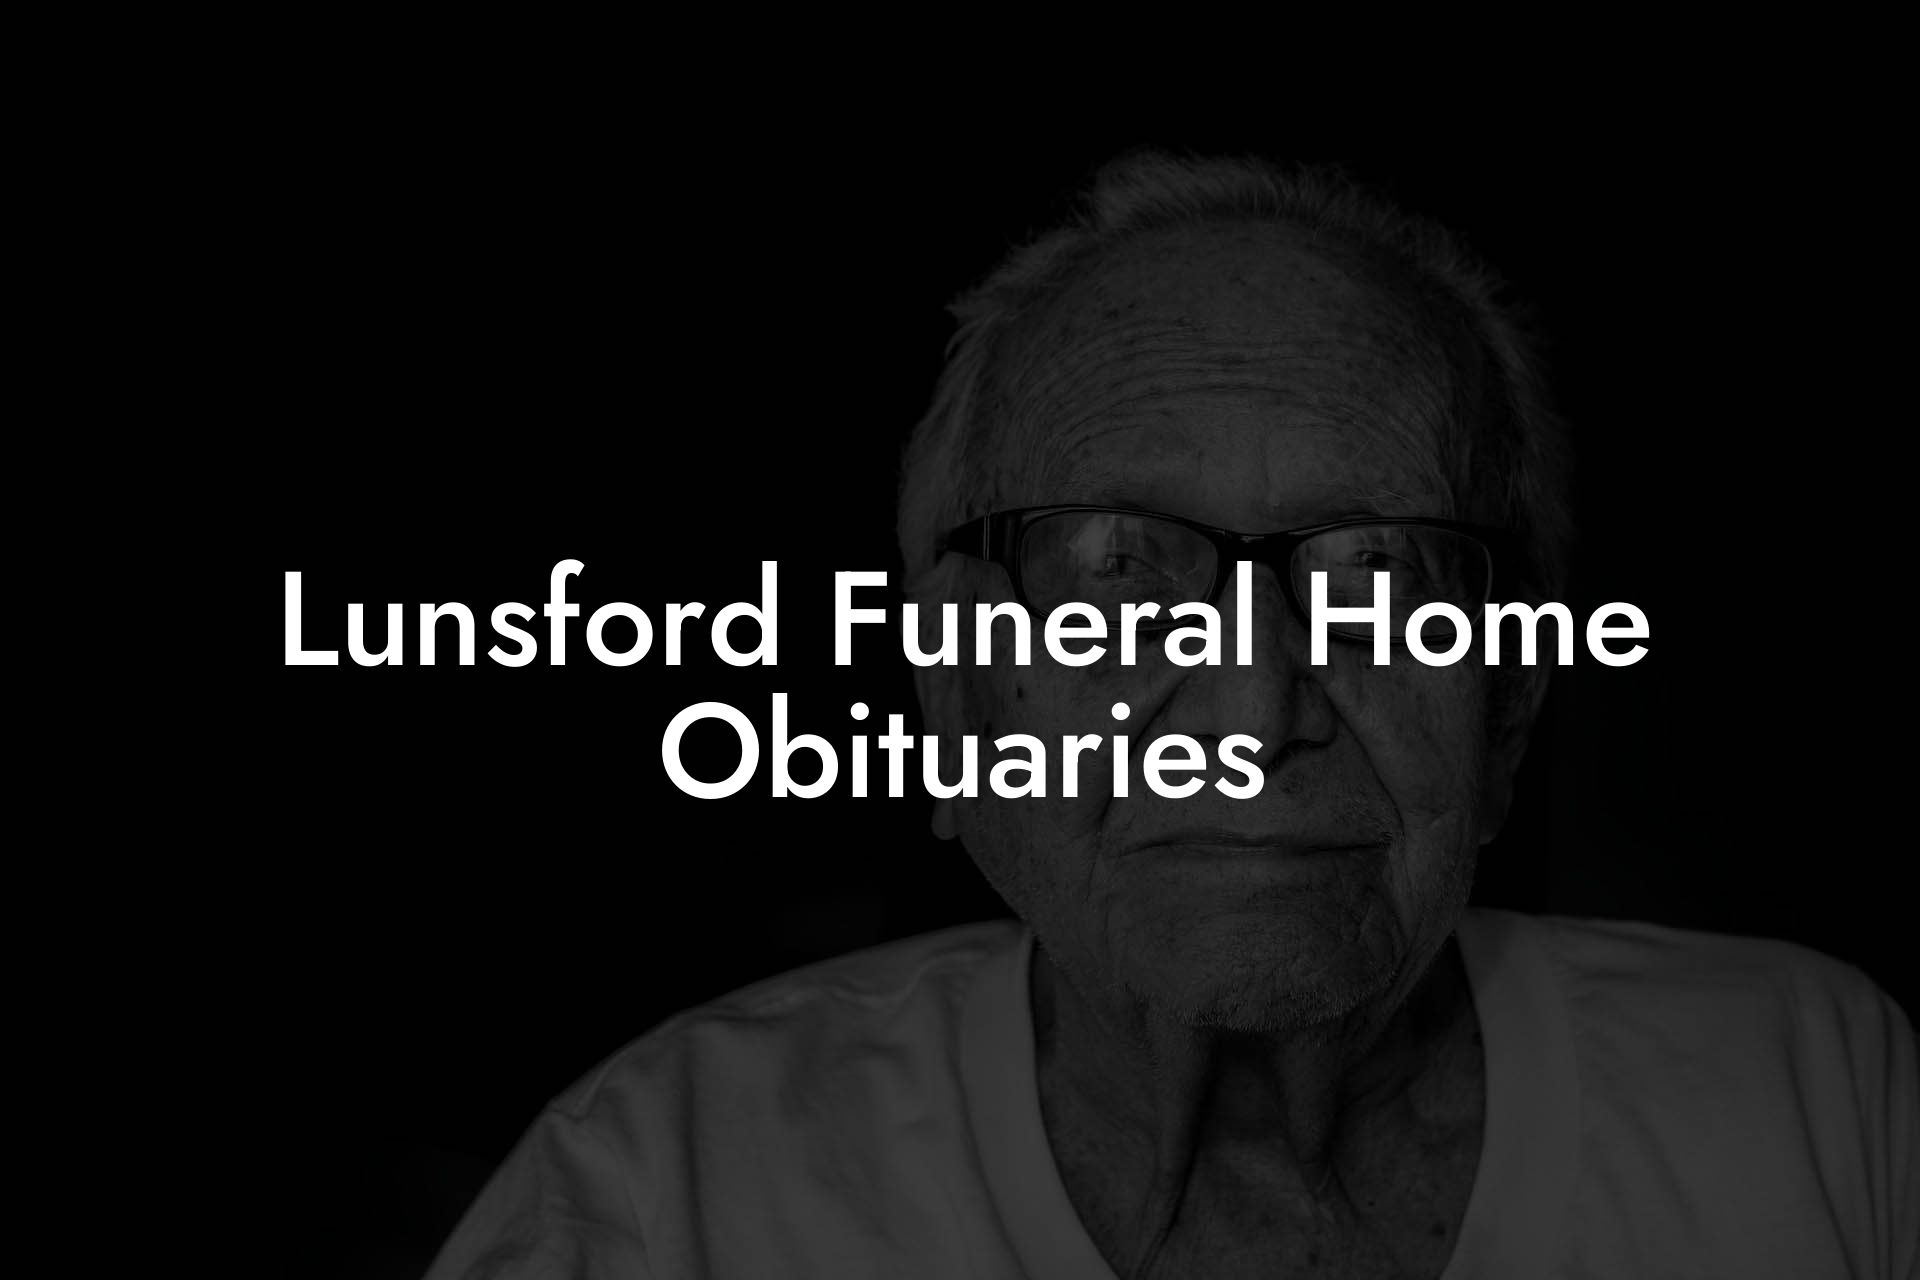 Lunsford Funeral Home Obituaries